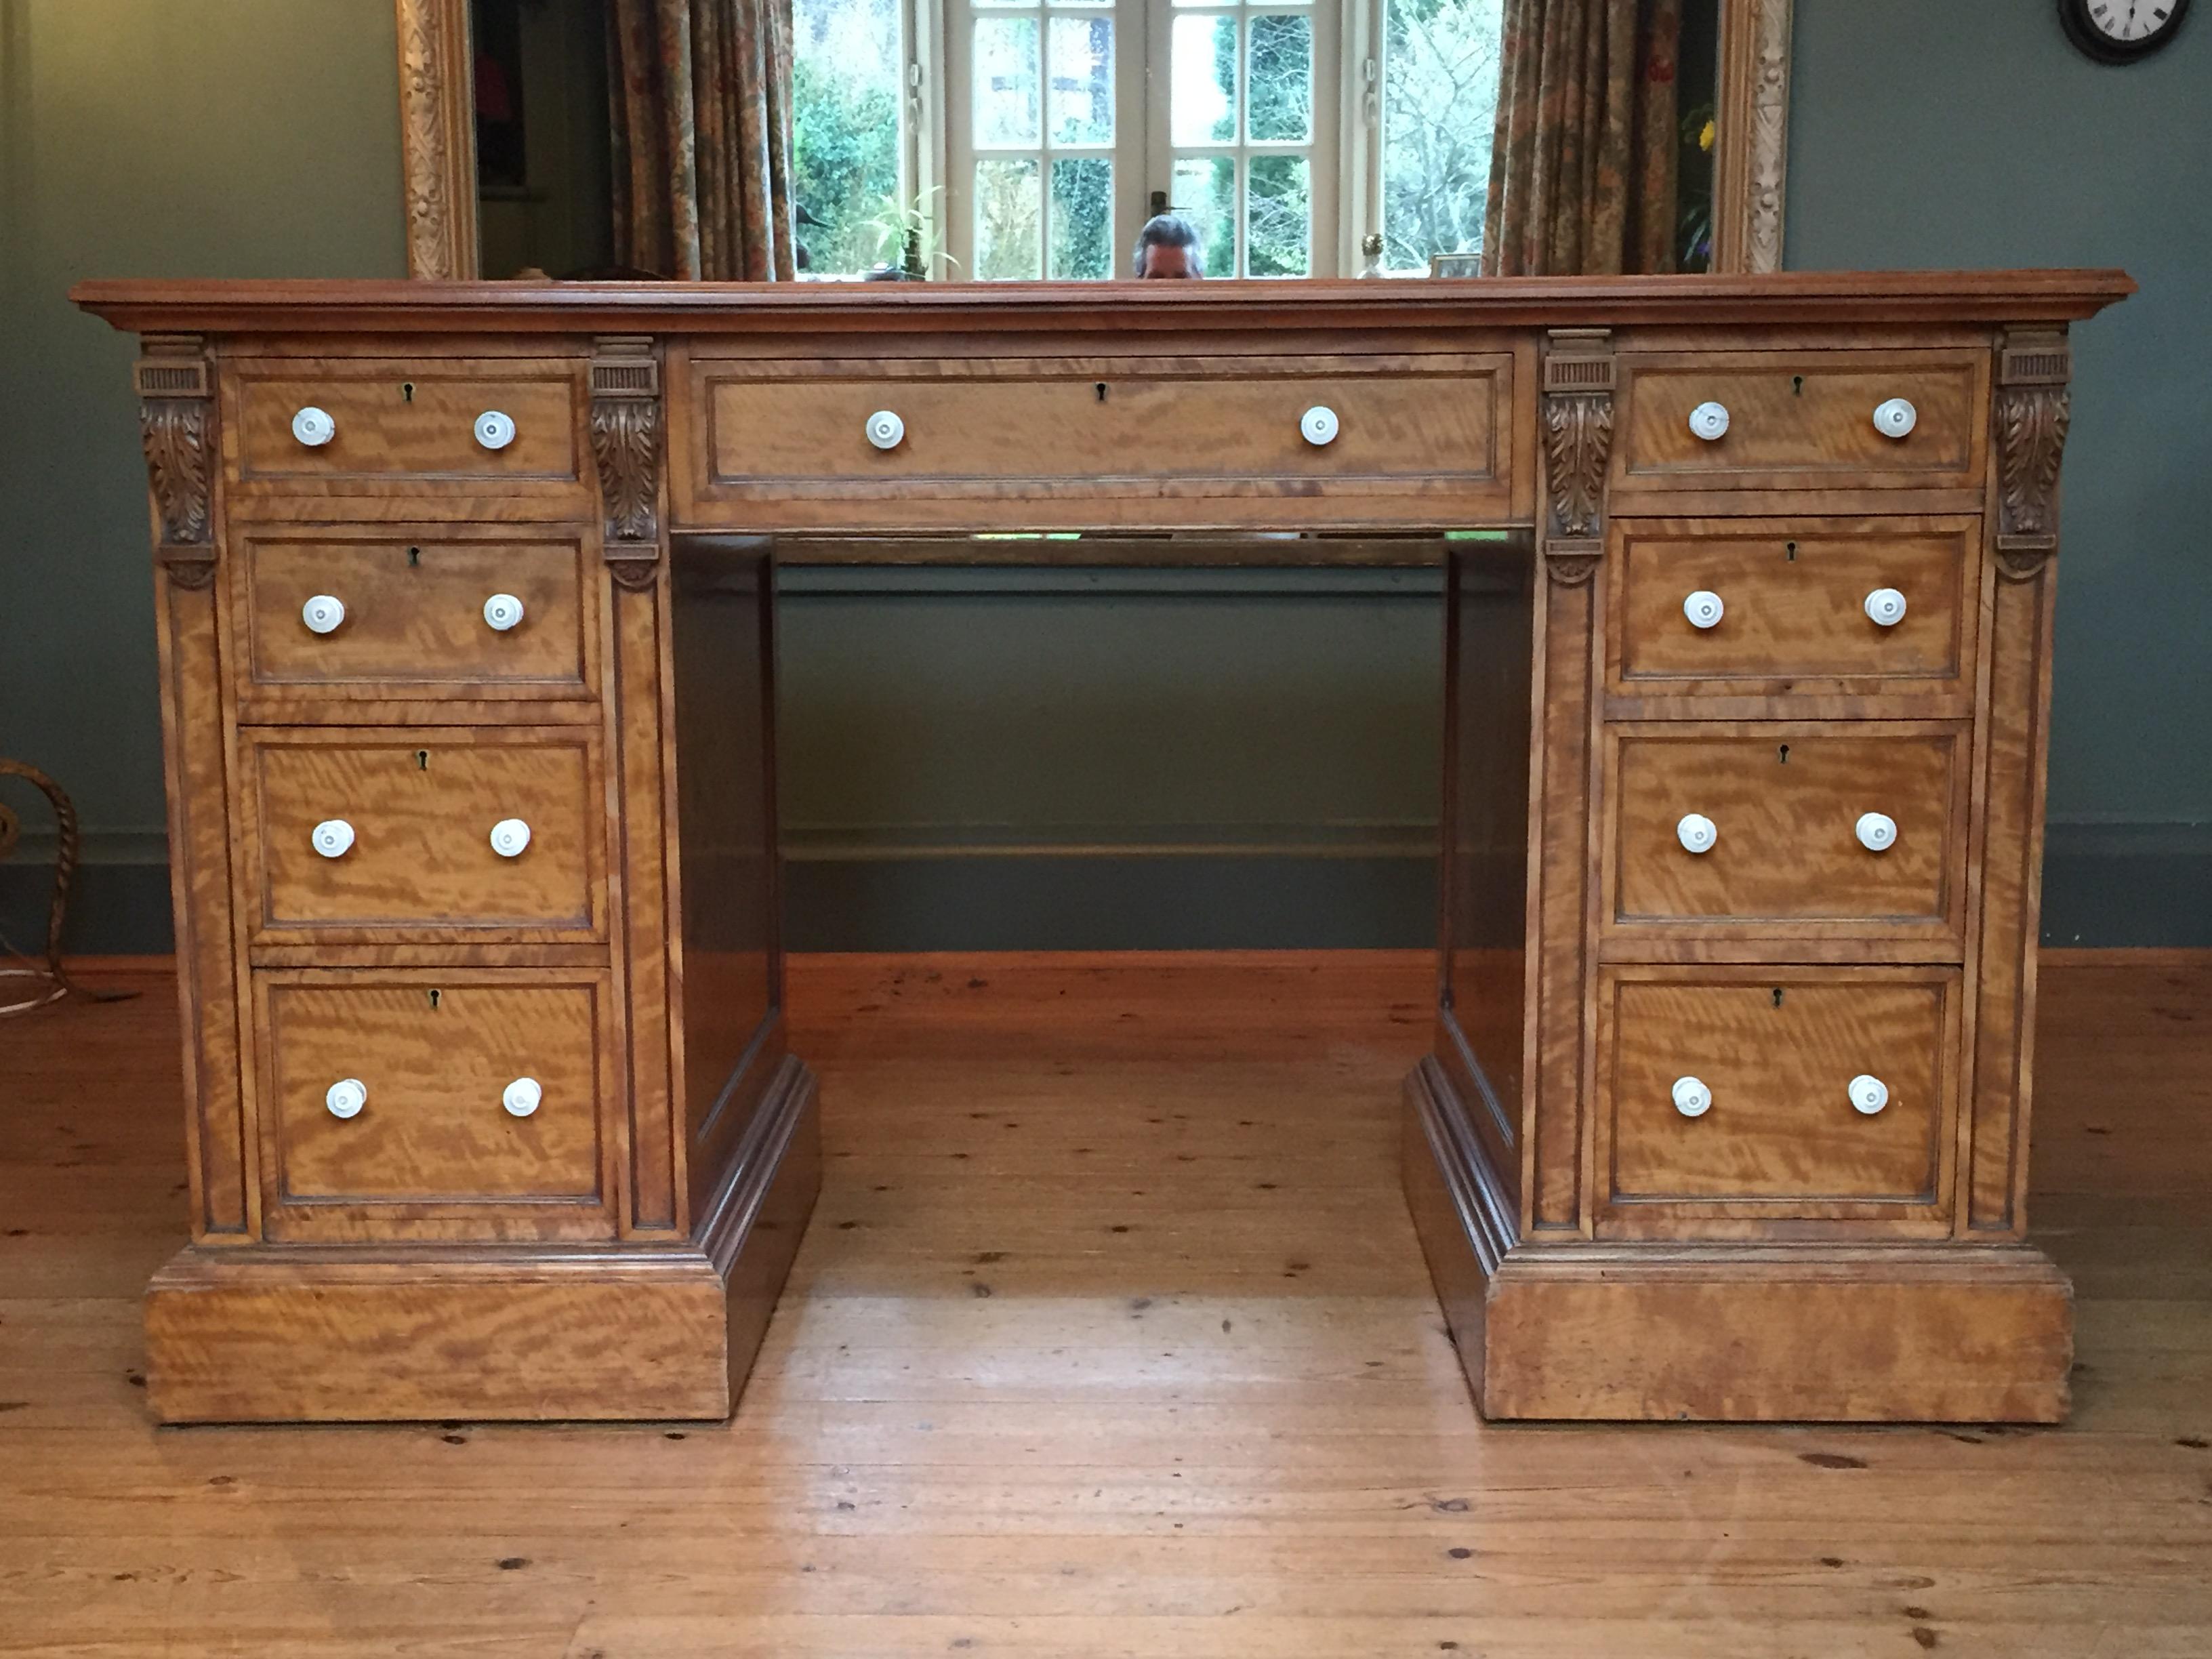 An exquisite 19th century pedestal desk in satinwood, the original tooled leather top over a central frieze drawer; each pedestal with carved corbels, four graduated drawers all with their original handles and plinth bases. This desk is in one